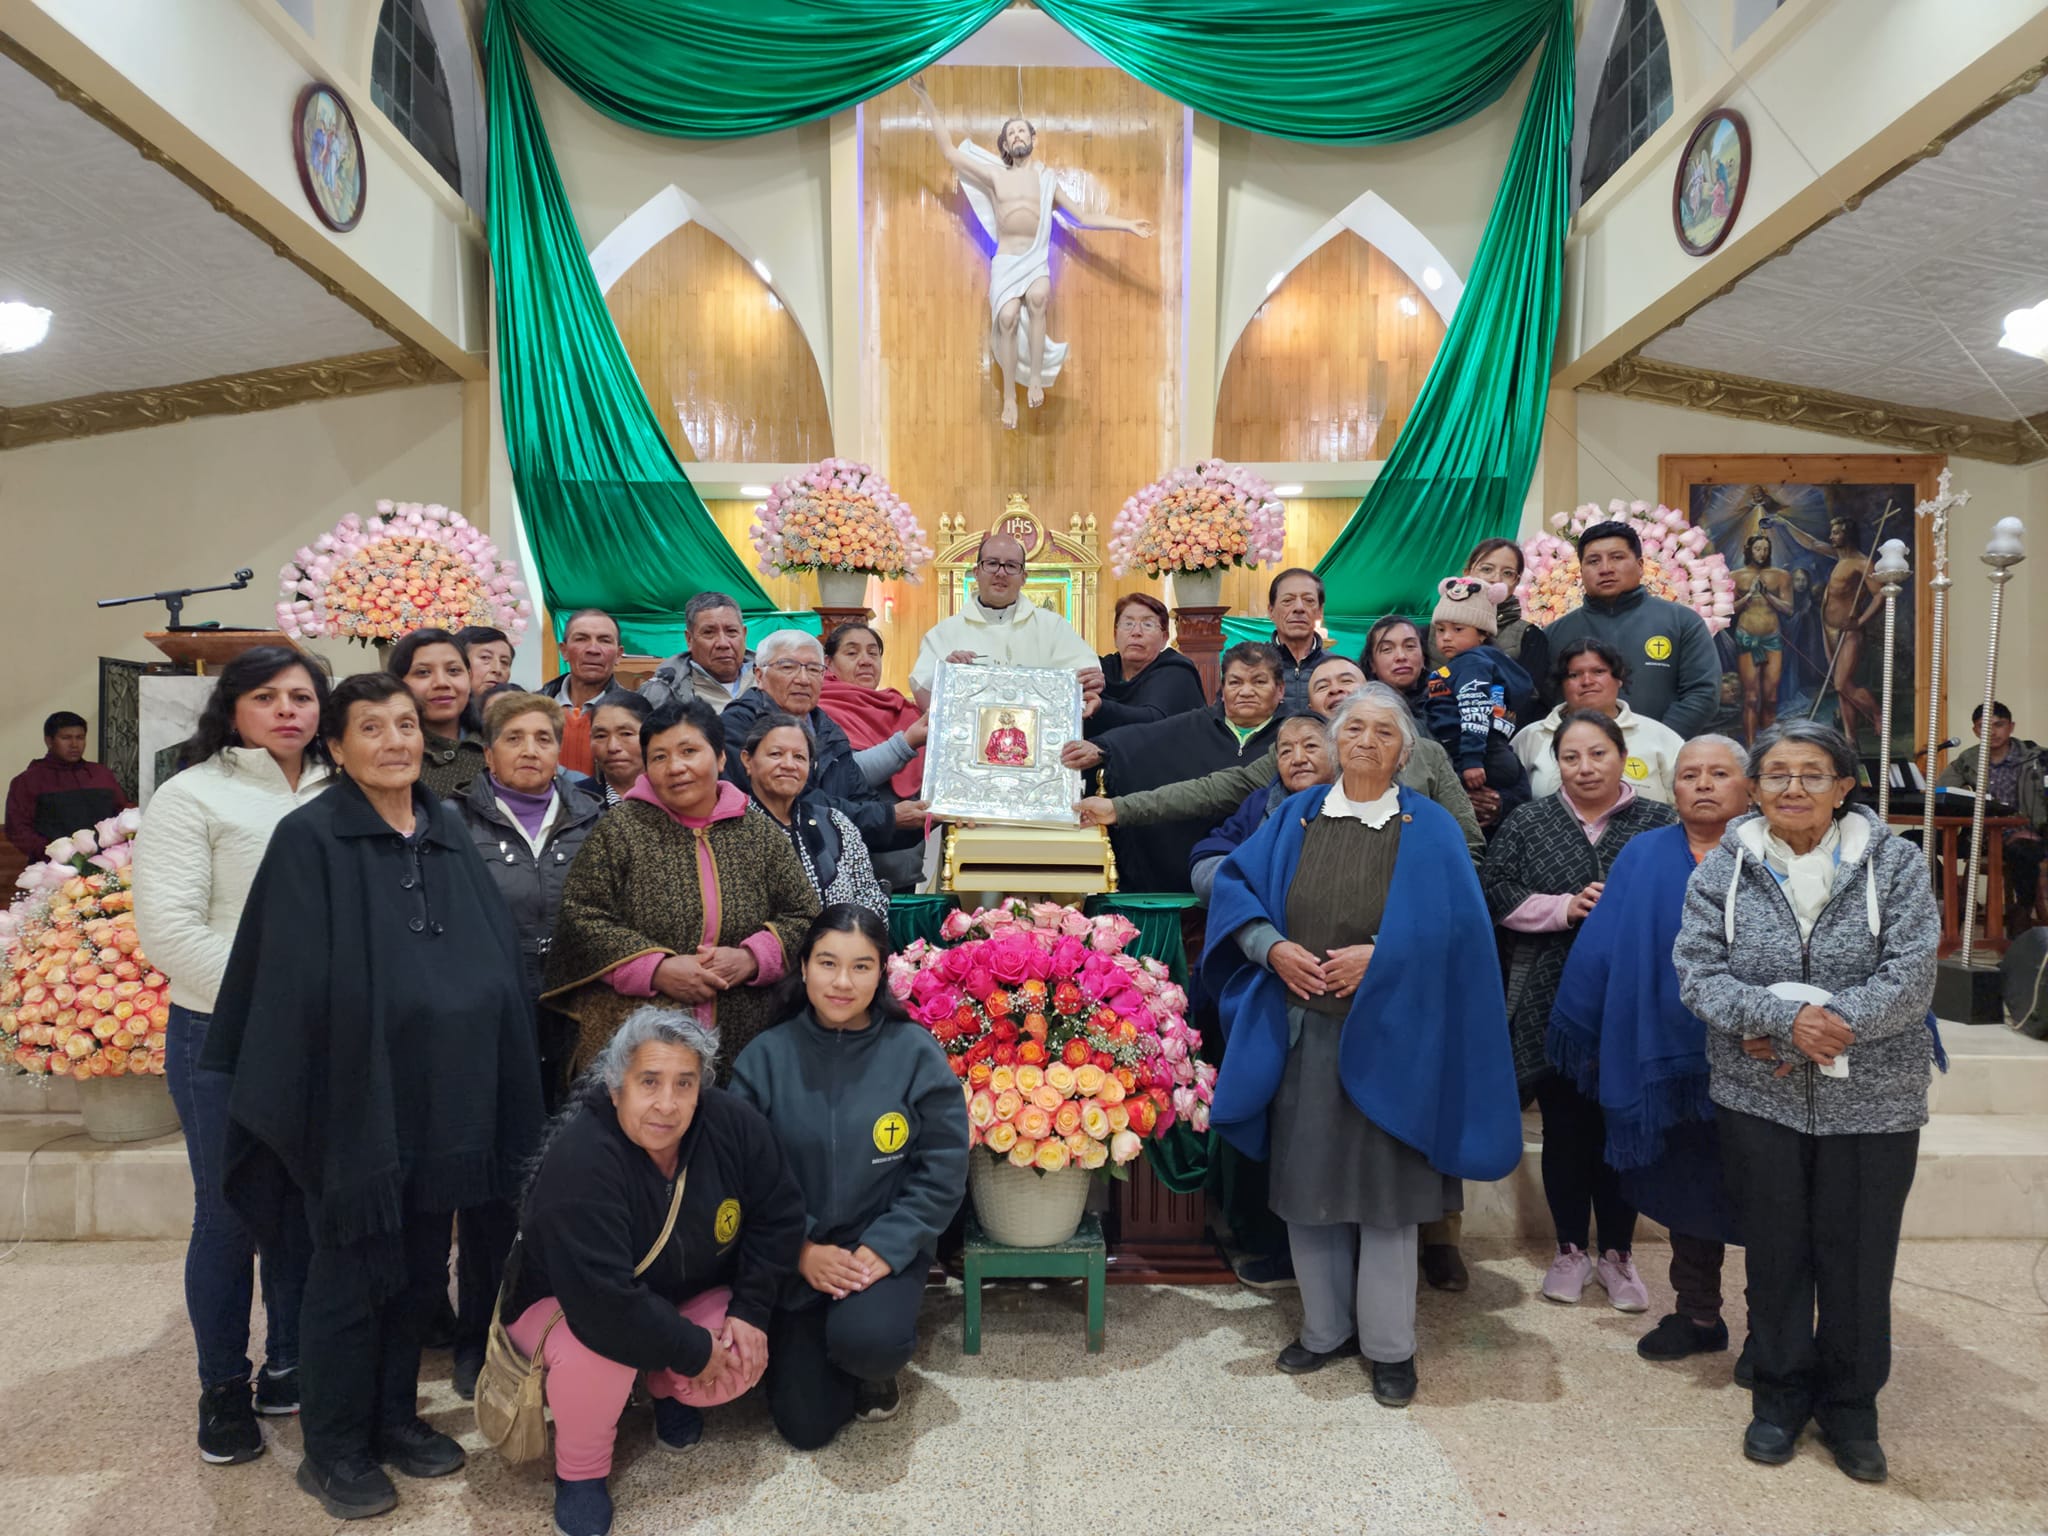 GOSPEL BOOK, SYMBOL OF THE INTERNATIONAL EUCHARISTIC CONGRESS, TOURED THE DIOCESE OF TULCÁN.